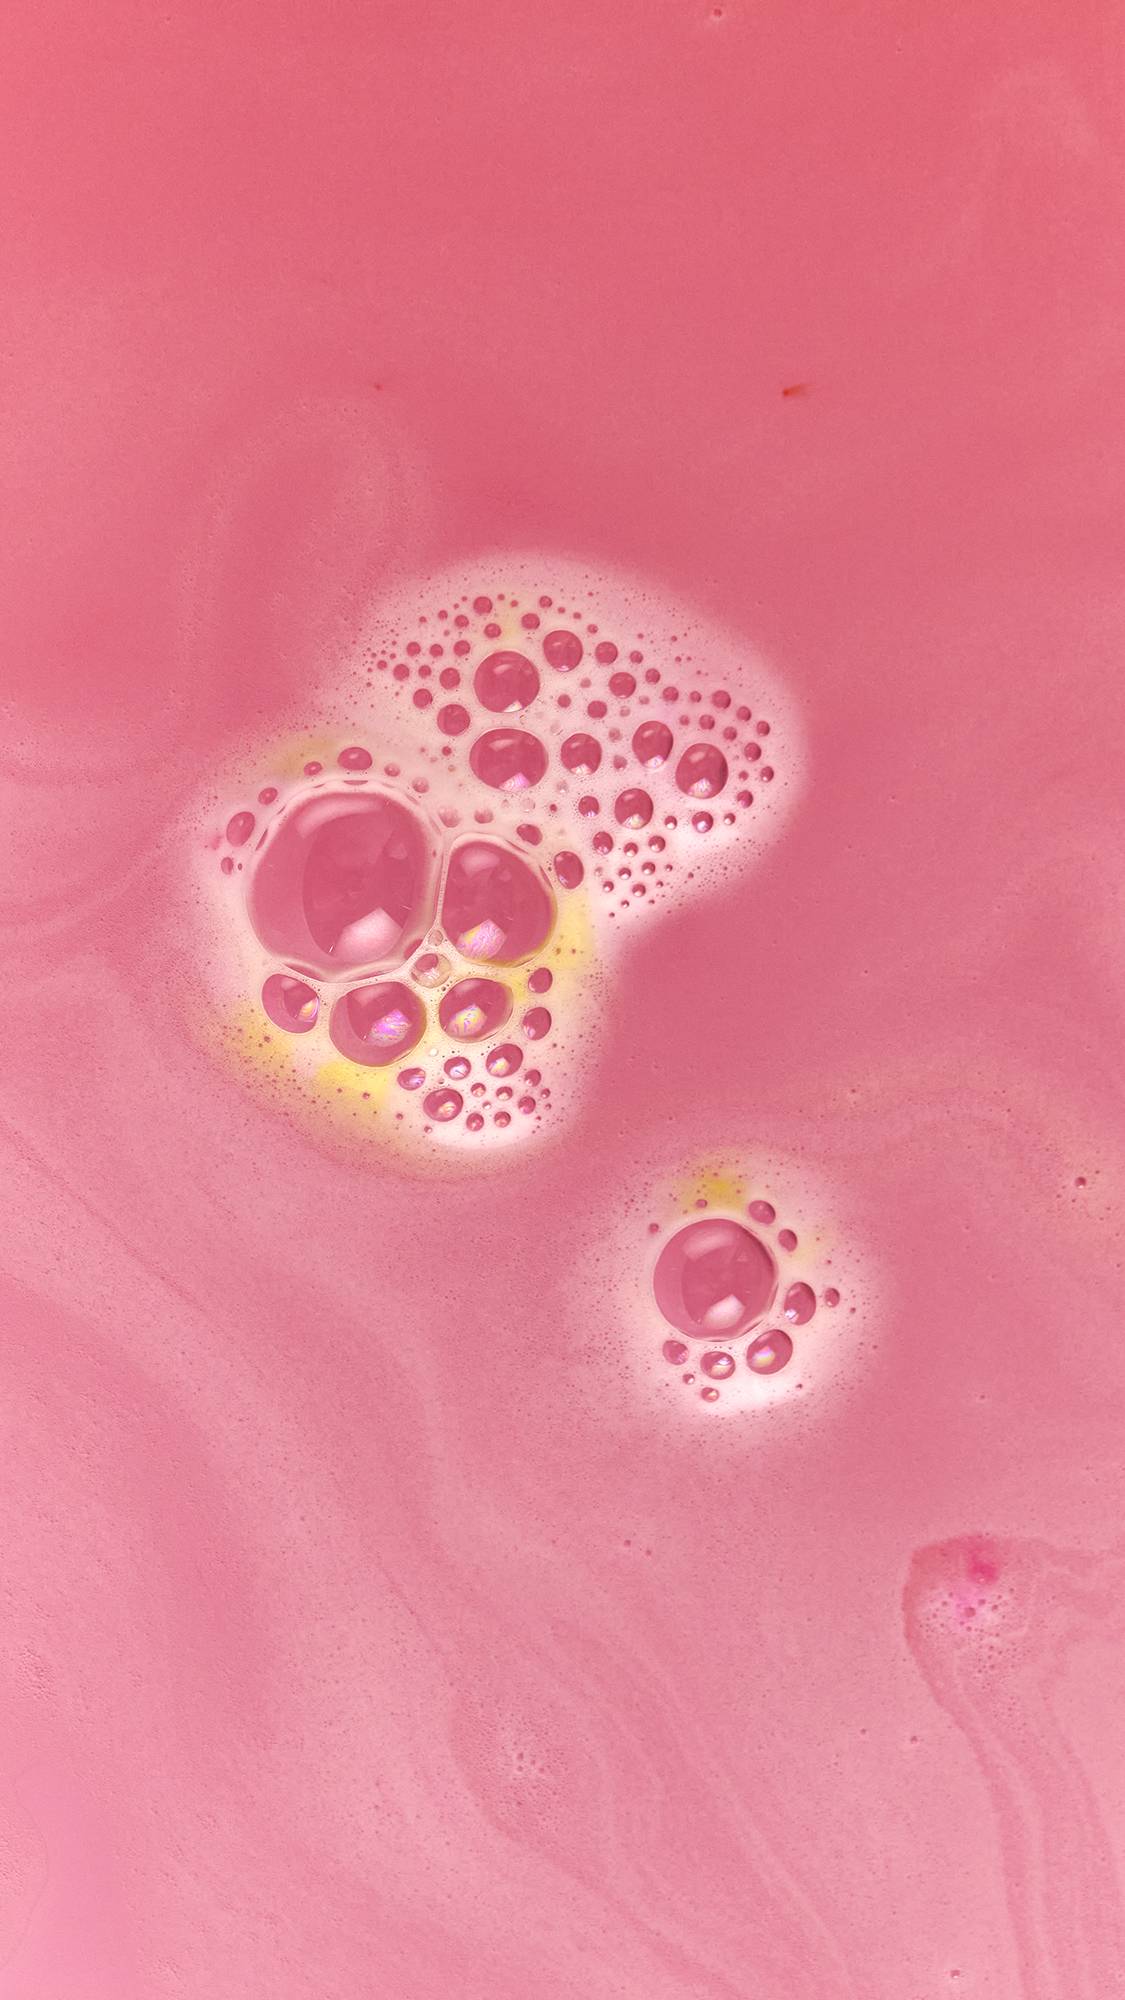 The image shows the delicate, velvet-pink water with gentle, foam bubbles and hints of yellow.